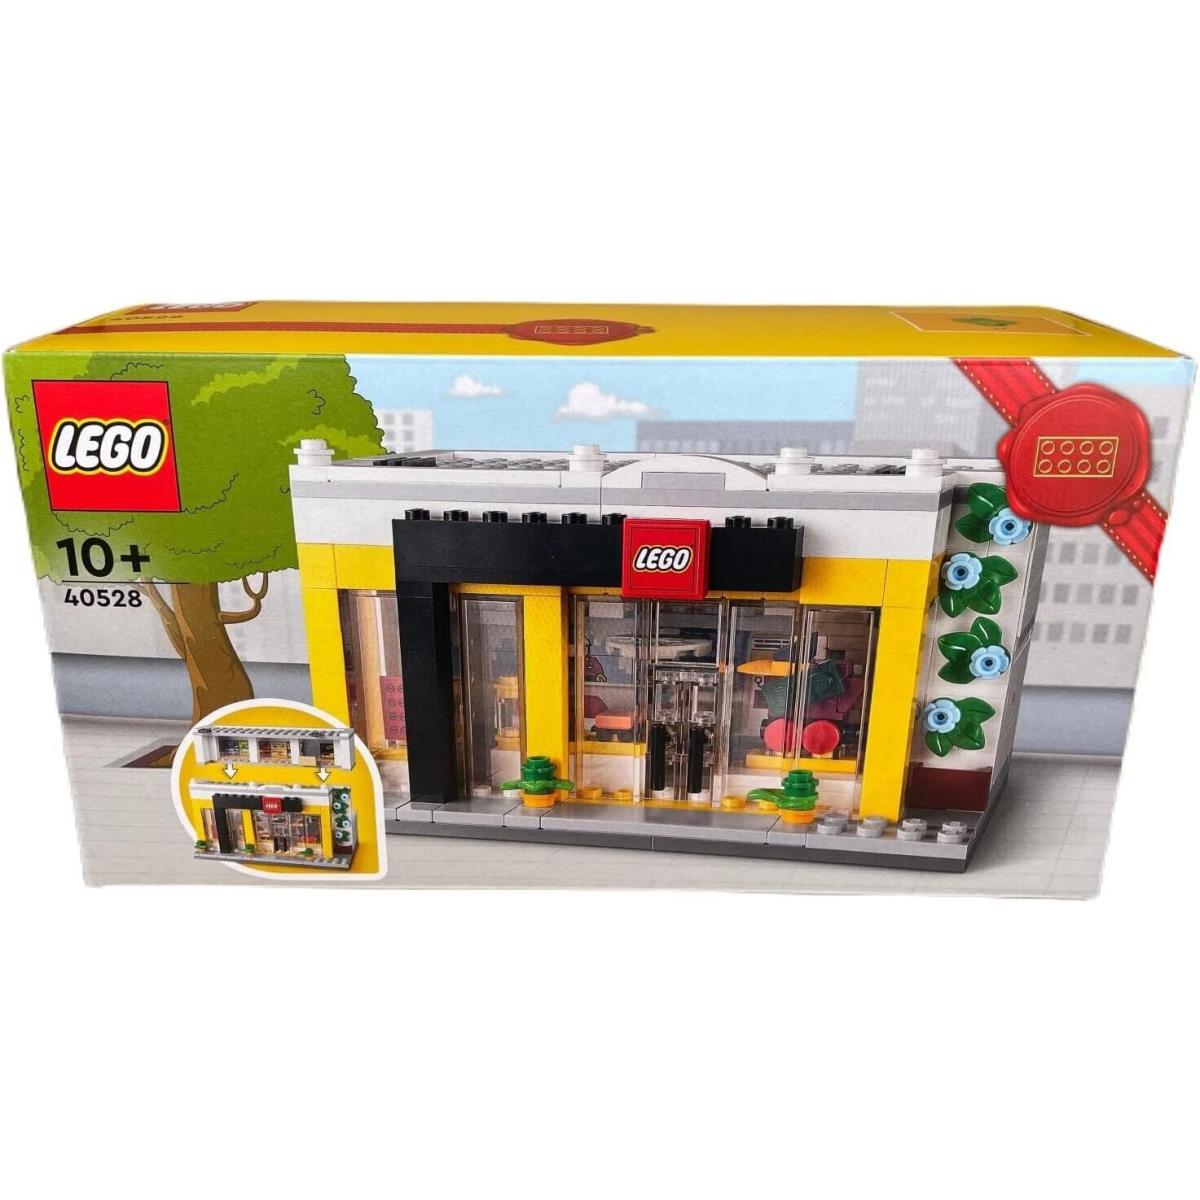 Lego 40528 Lego Store Grand Opening Gwp Exclusive Promotional